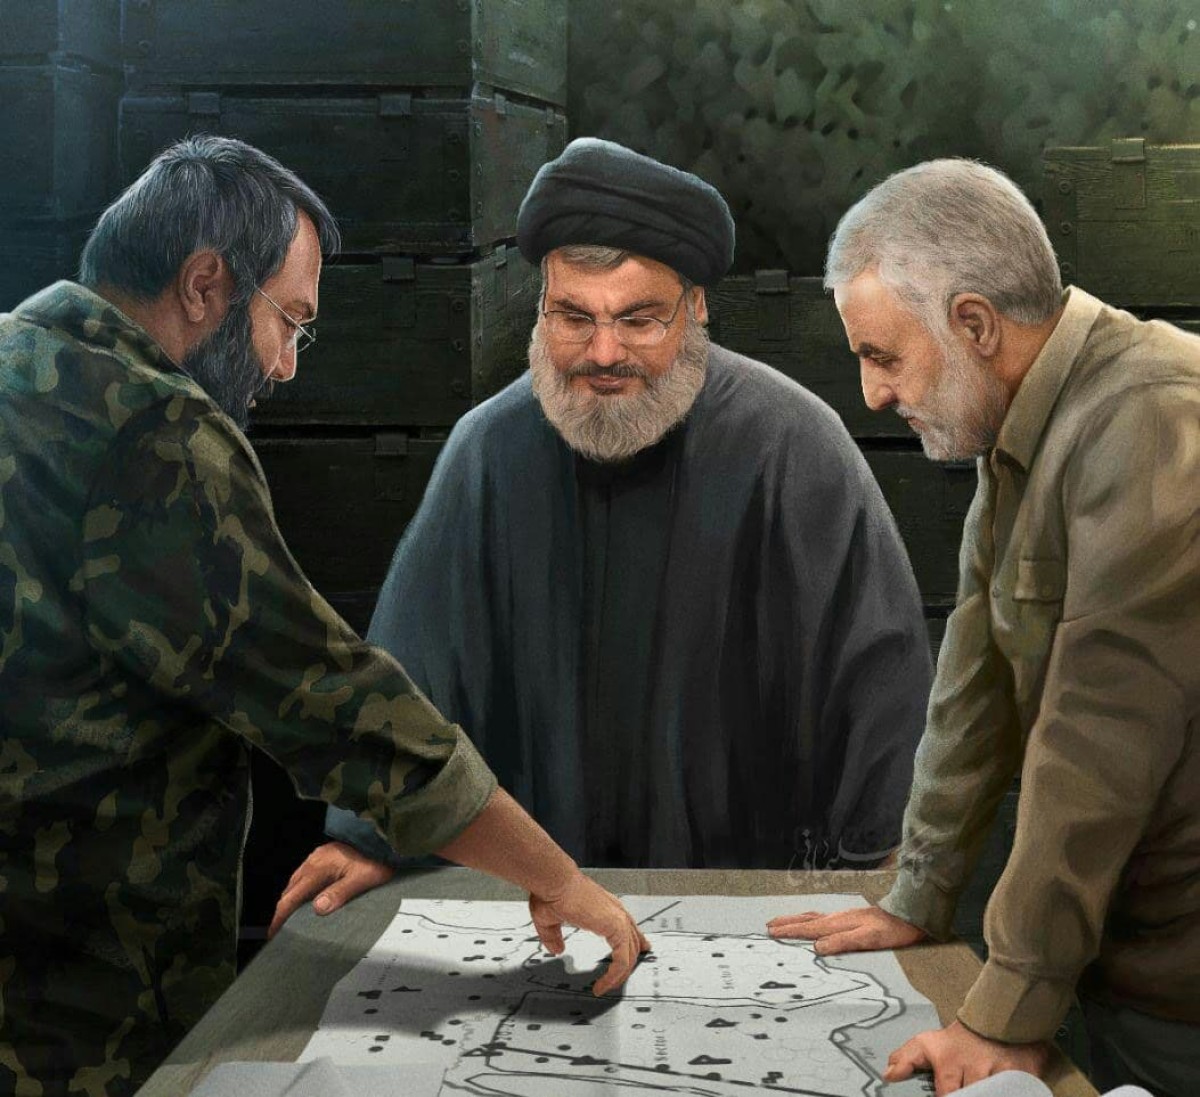  One Man’s Journey: A Story of Gen. Soleimani’s Dedication and Sacrifice in South Lebanon